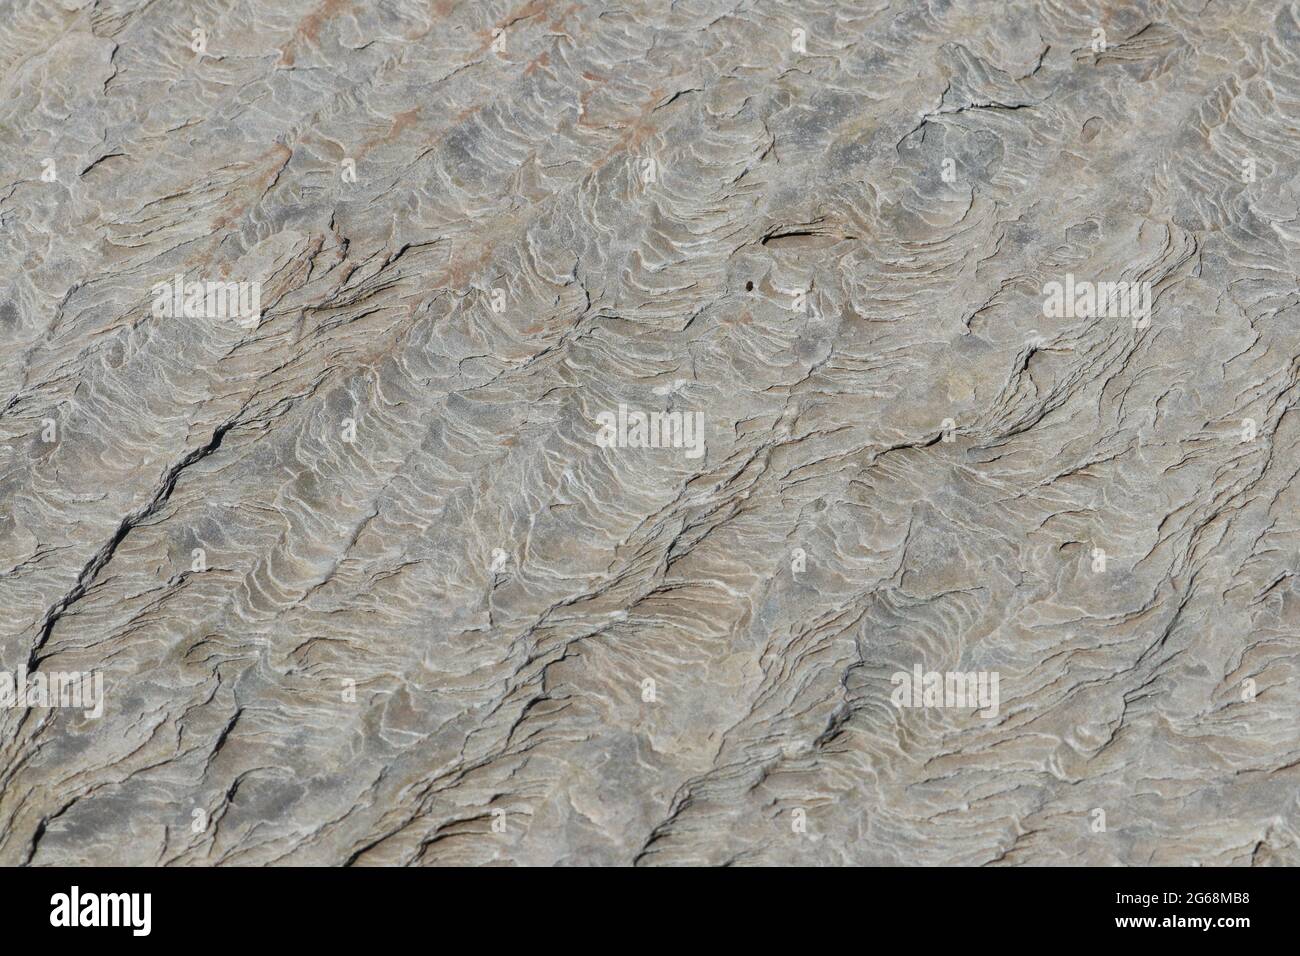 Abstract textured background of close up shale rock formation Stock Photo